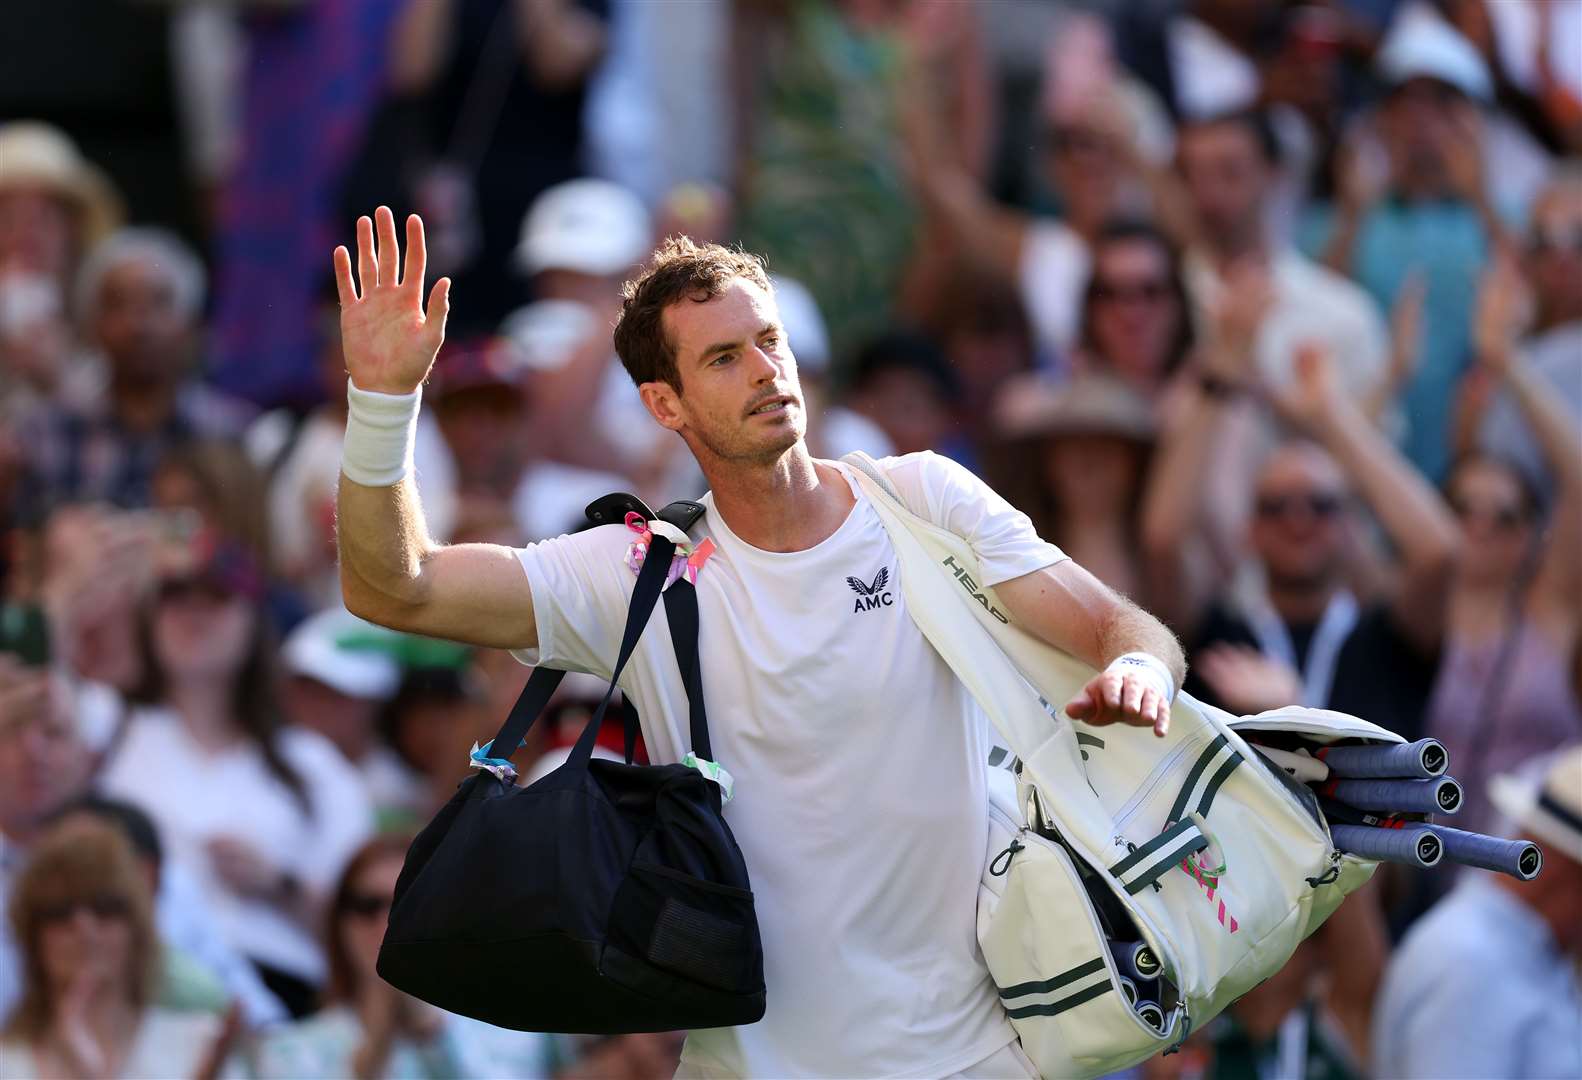 Sir Andy Murray waves to the crowd after losing against Stefanos Tsitsipas (Steven Paston/PA)